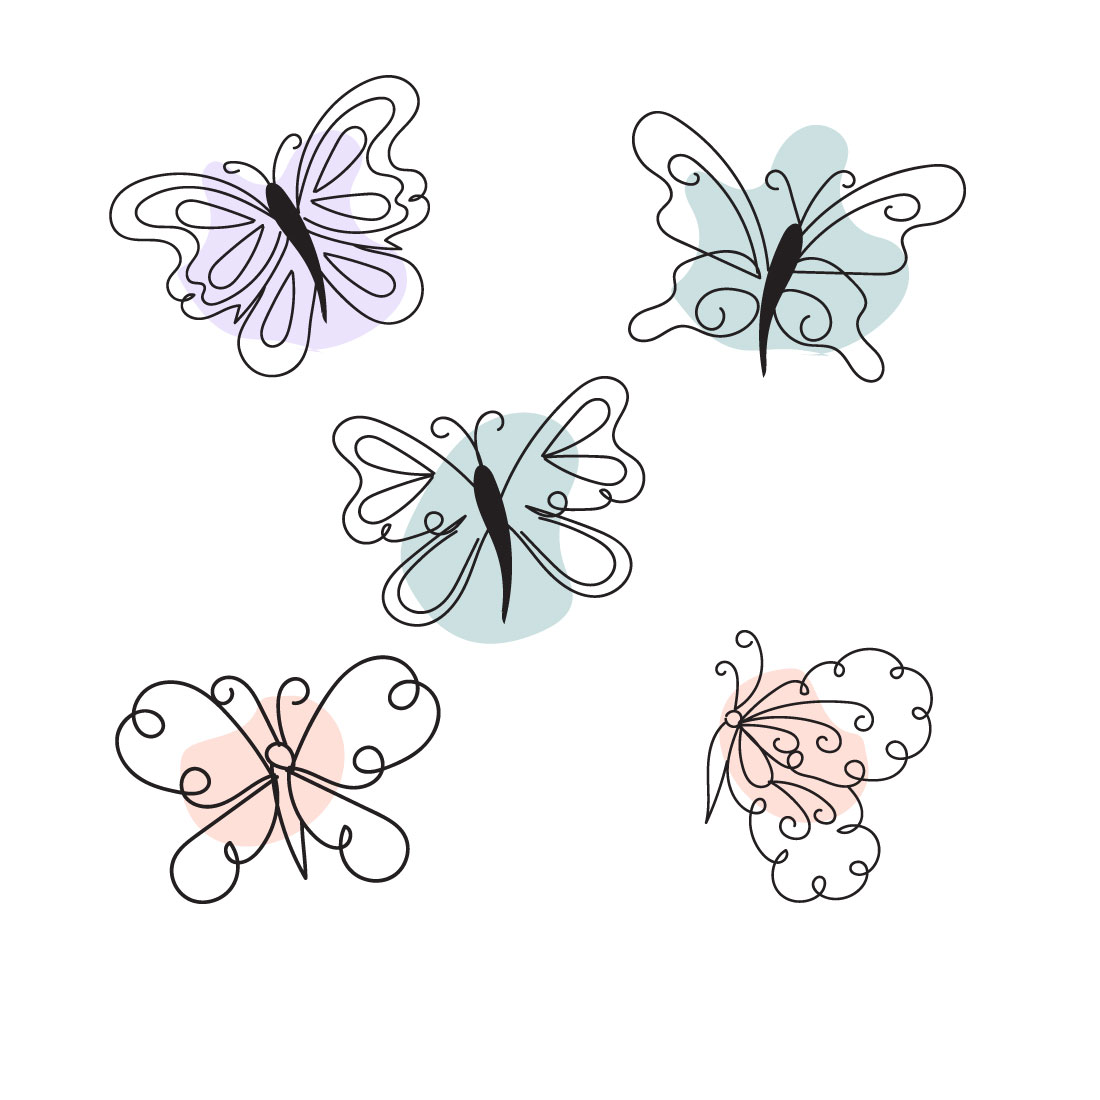 Group of four different colored butterflies on a white background.